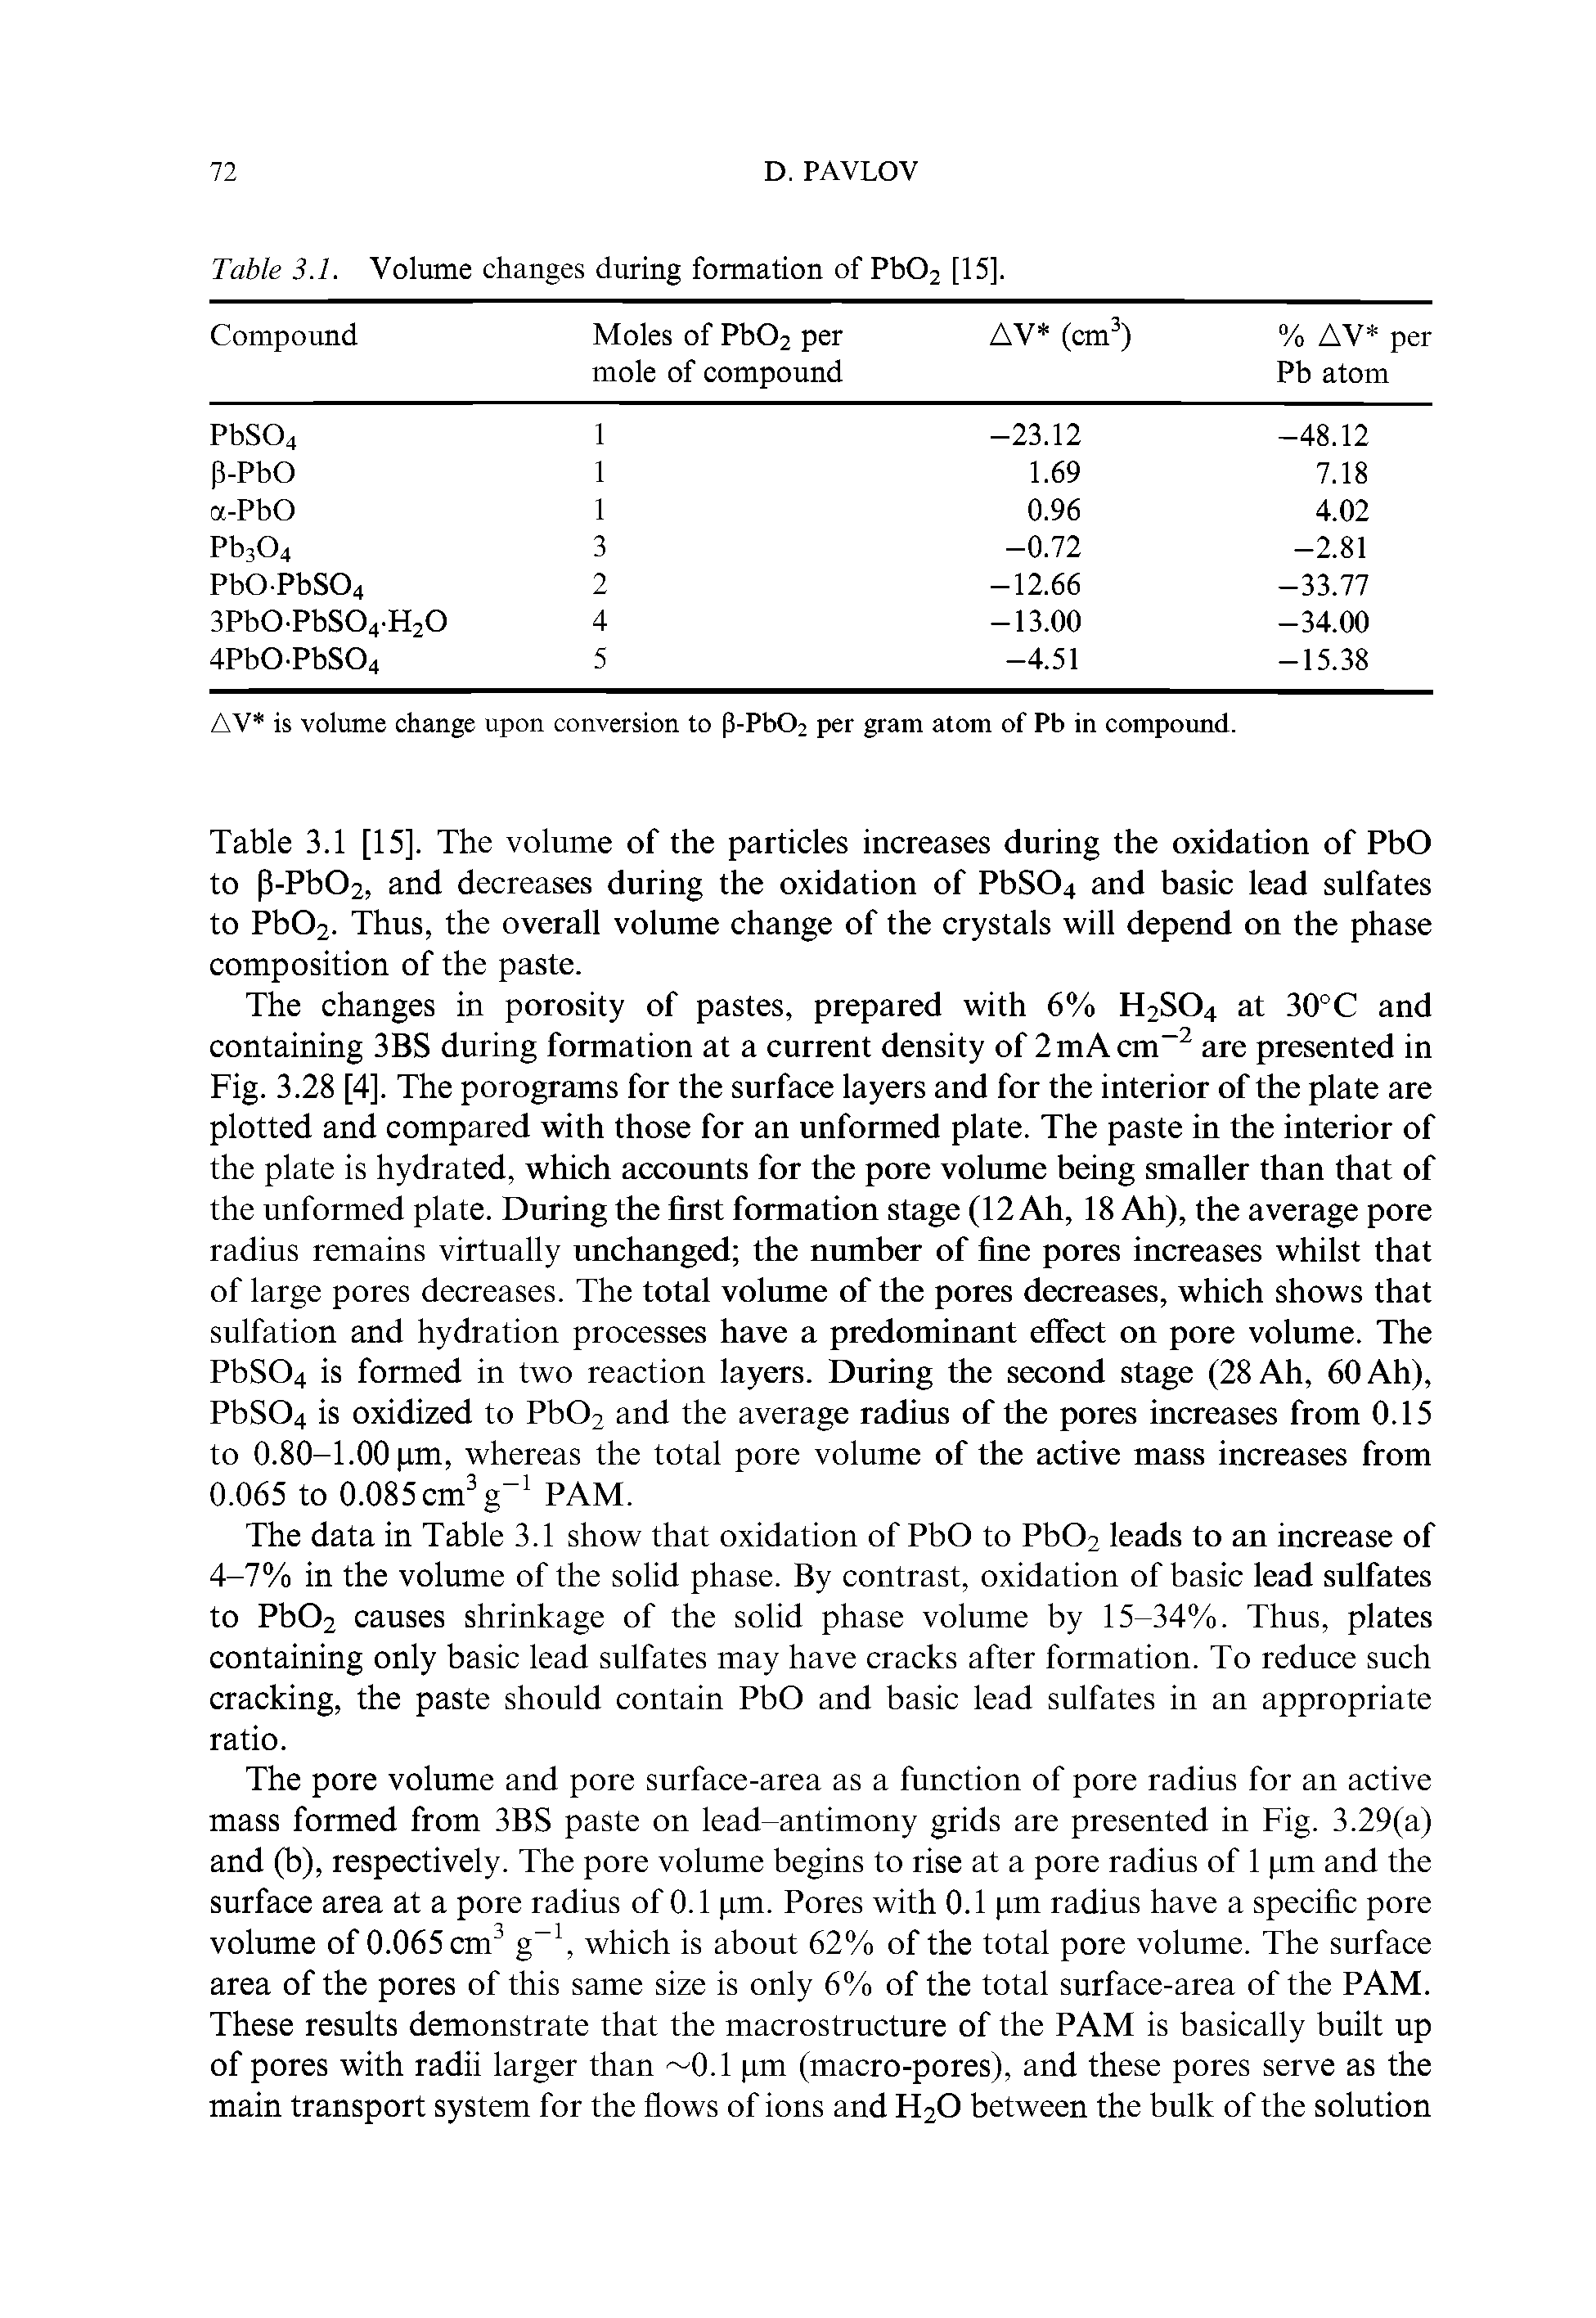 Table 3.1 [15]. The volume of the particles increases during the oxidation of PbO to p-Pb02, and decreases during the oxidation of PbS04 and basic lead sulfates to Pb02. Thus, the overall volume change of the crystals will depend on the phase composition of the paste.